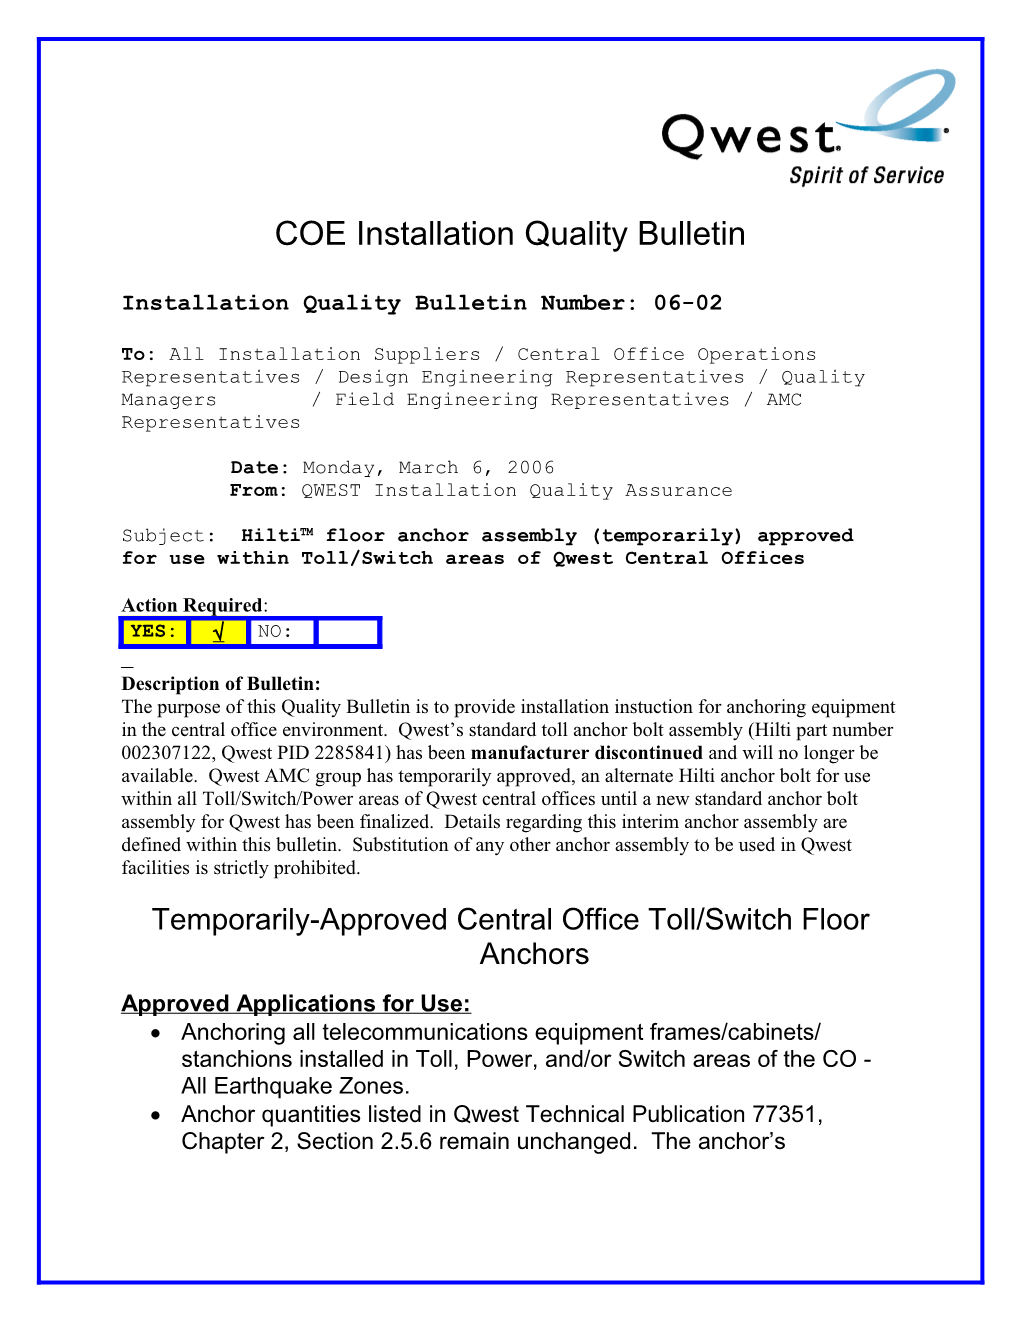 Installation Quality Bulletin Number: 06-02